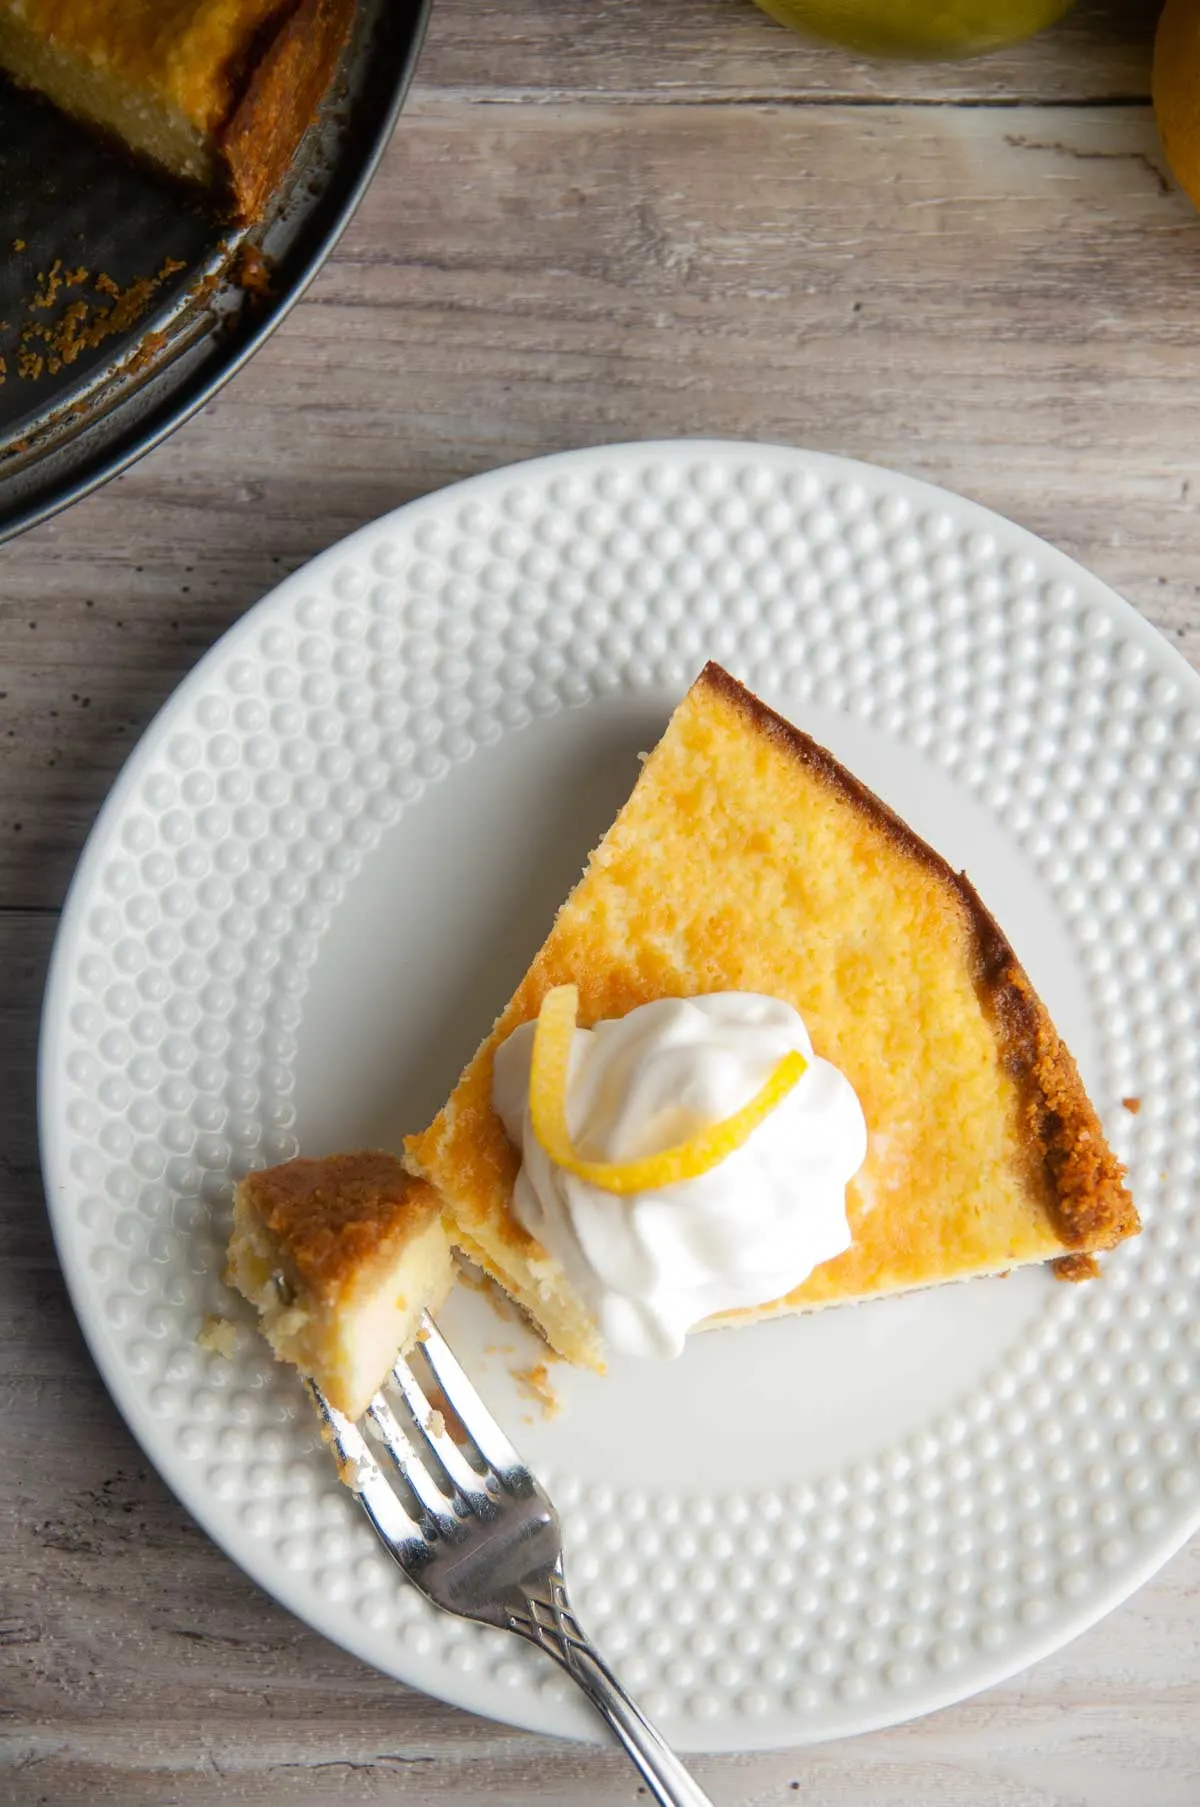 Learn how to make the best graham cracker crust for cheesecake and all types of pies and other desserts. Bookmark this graham crust to make with all your favorite fillings.